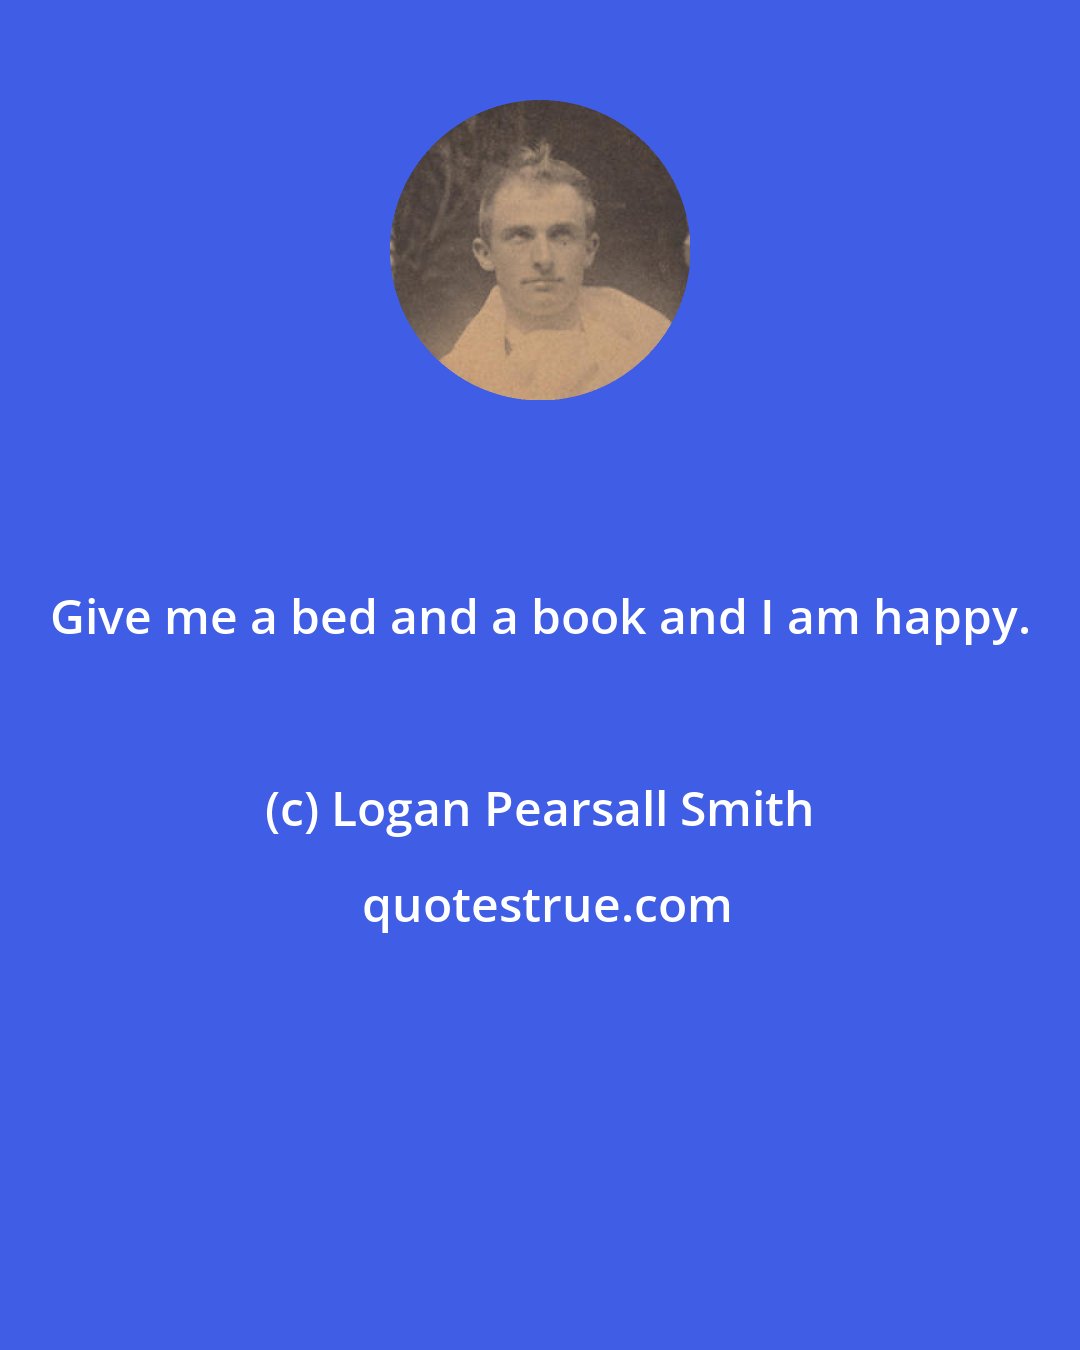 Logan Pearsall Smith: Give me a bed and a book and I am happy.